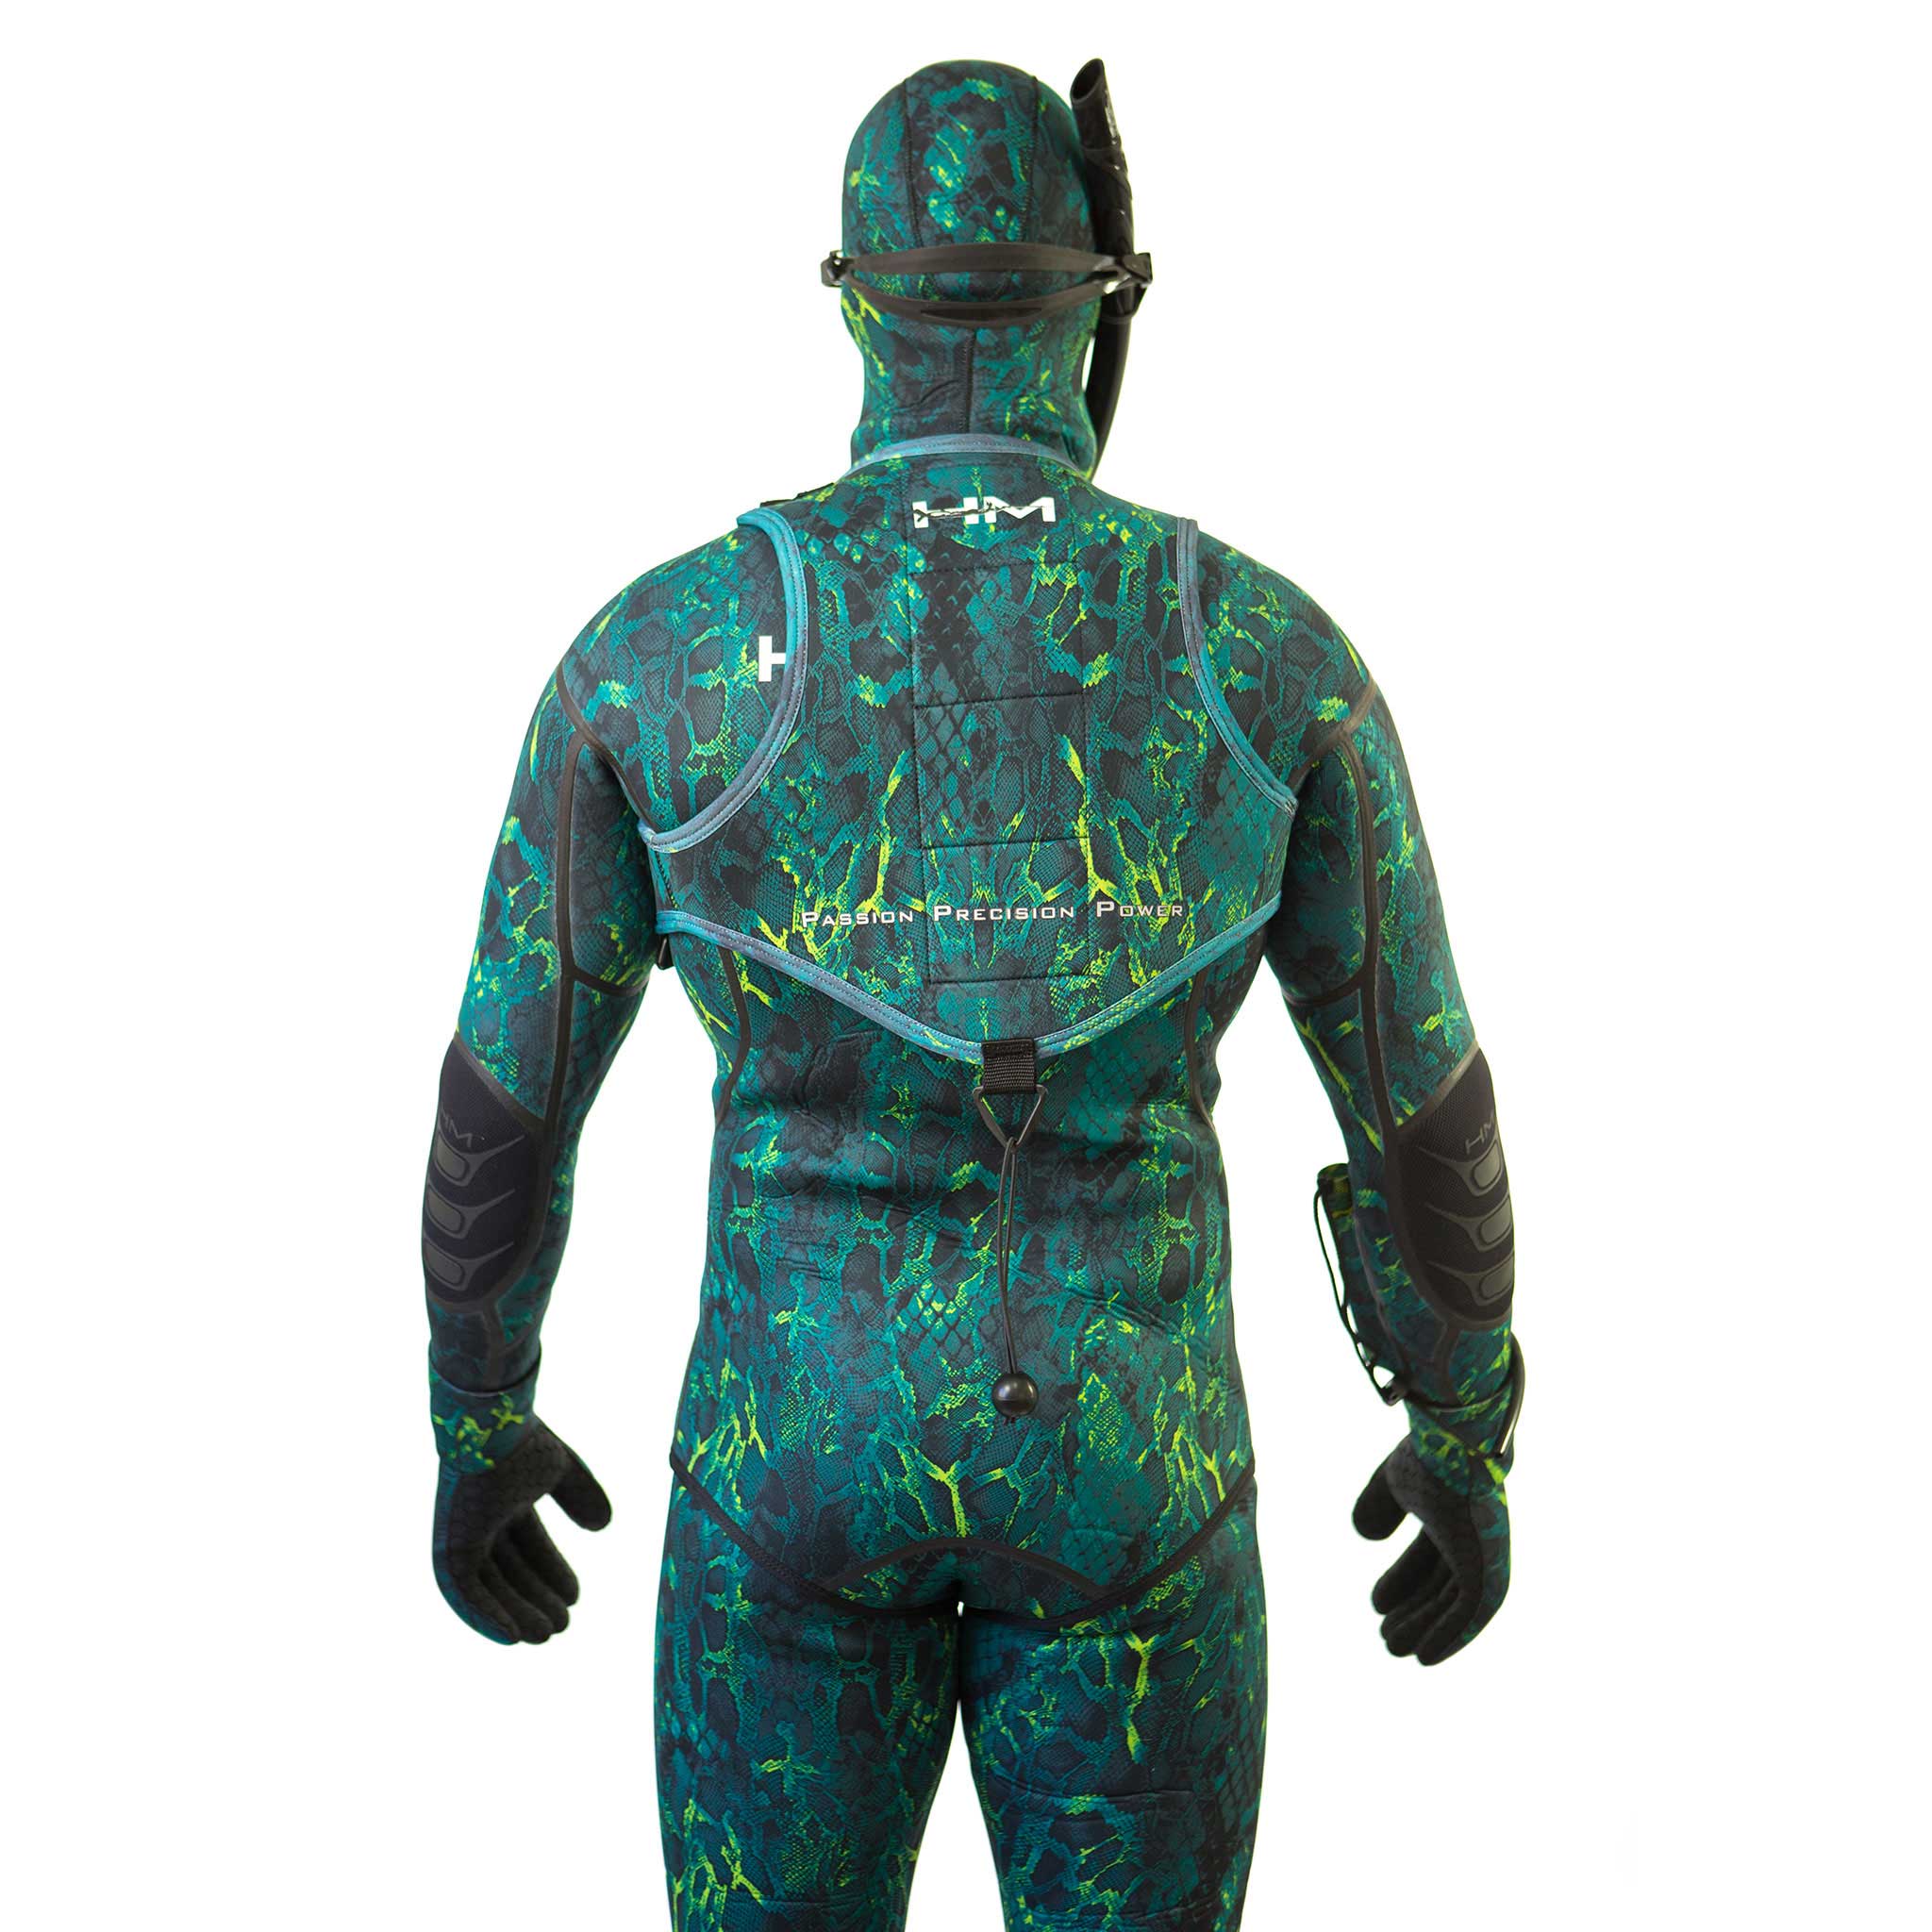 Buy Beuchat Mundial Pacific Green 5mm Wetsuit, Spearfishing Wetsuit, Freediving Wetsuit